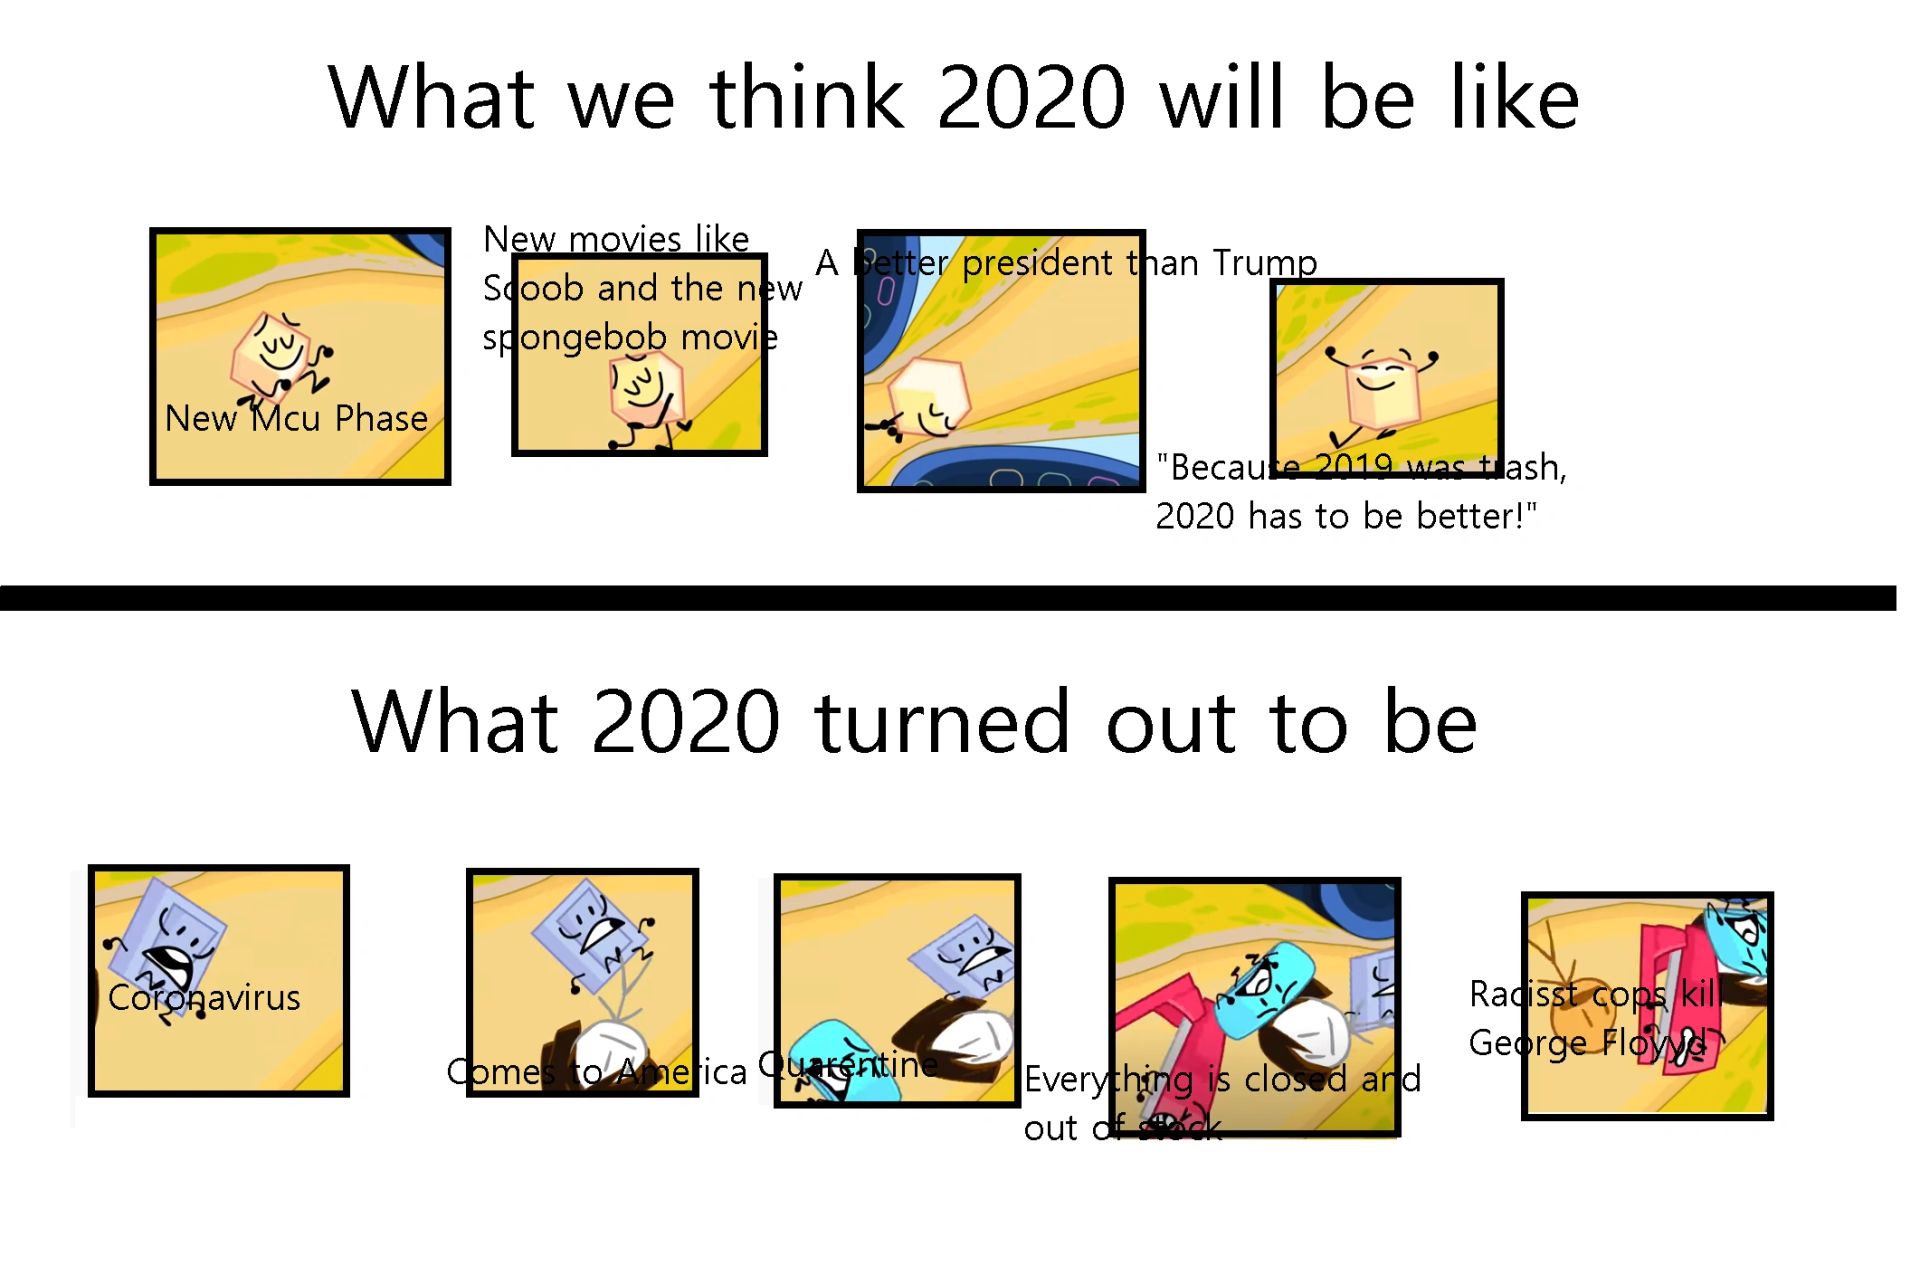 What we think 2020 will be like
New movies like
Scoob and the new
spongebob movie
New Mcu Phase
Coronavirus
A Better president than Trump
0
Be
What 2020 turned out to be
"Becaute 20
was tlash,
2020 has to be better!"
Comes to America Quatenti
entin
Everything is closed and
out of
Radisst cops kil
George Floyd